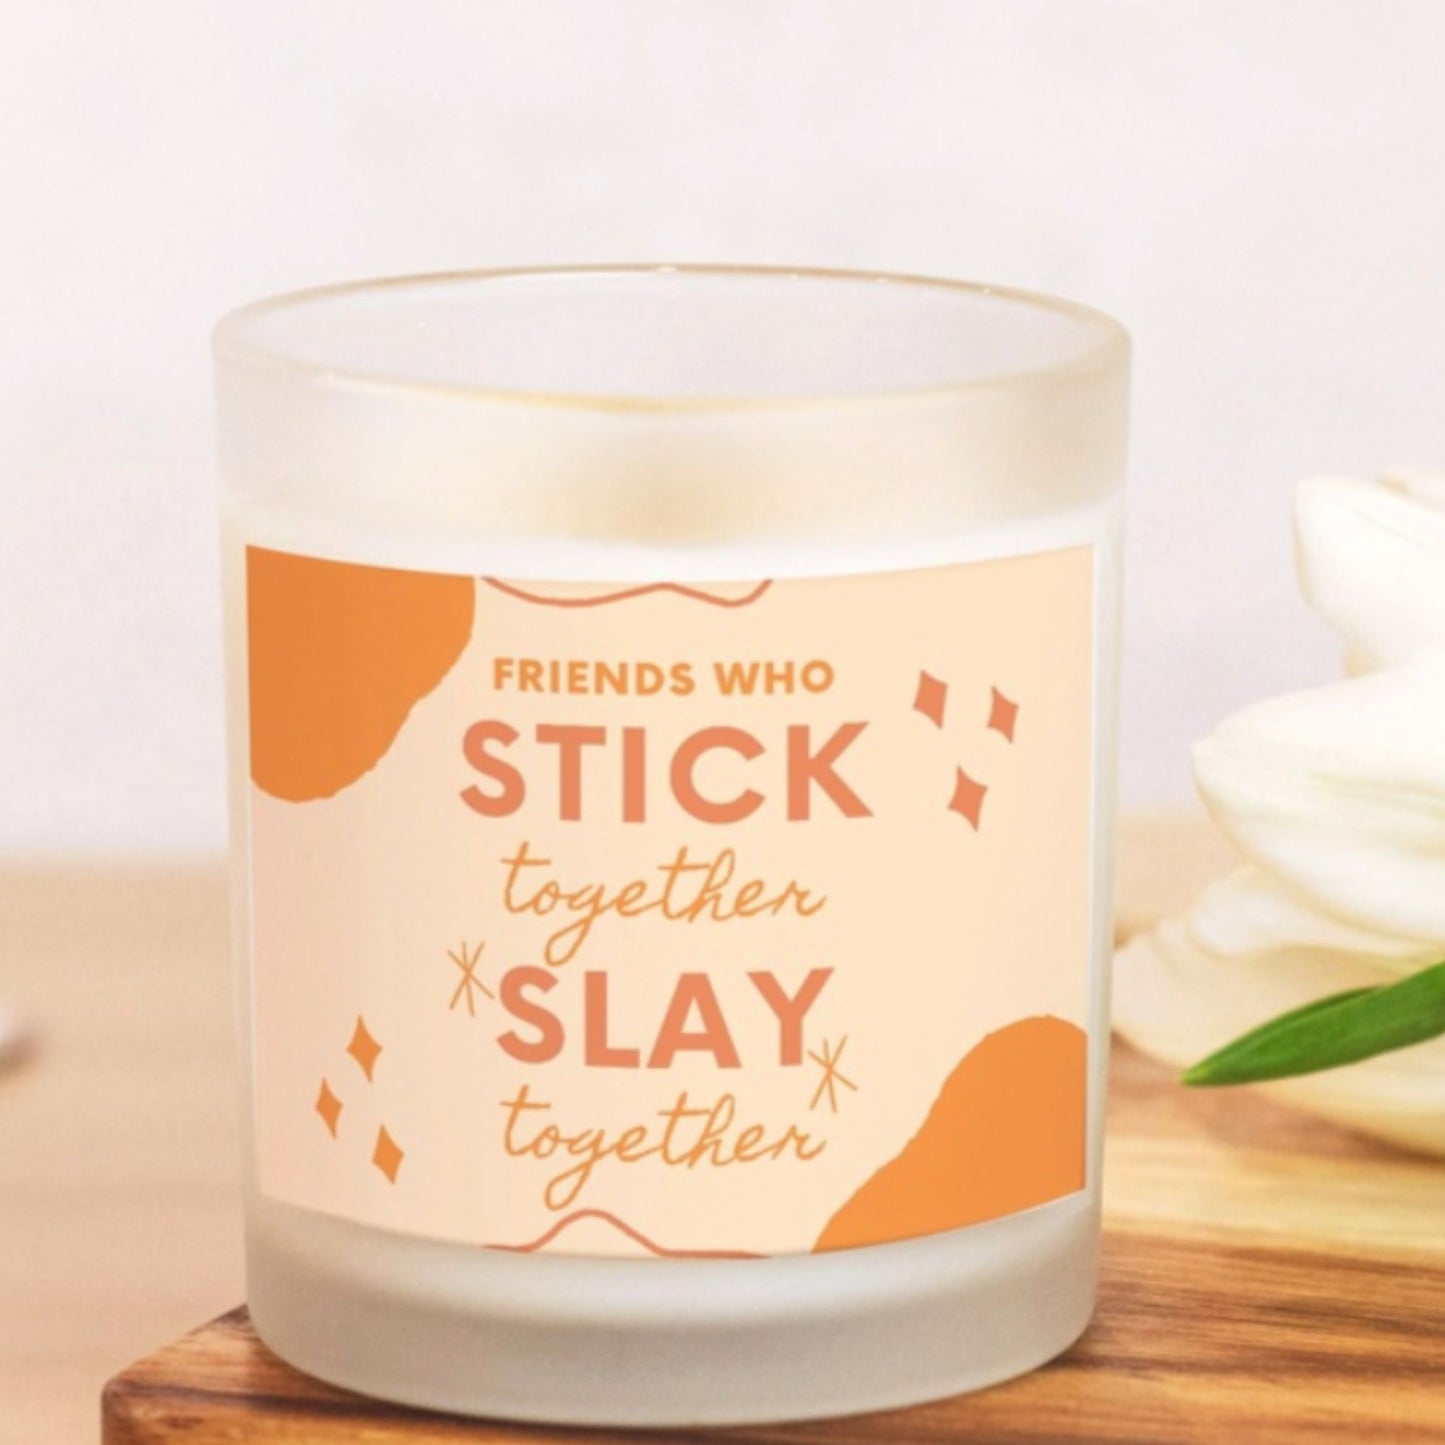 Friends Who Stick Together Candle Premium Non-Toxic Wood Wick Candle Frosted Glass (Hand Poured 11 oz)